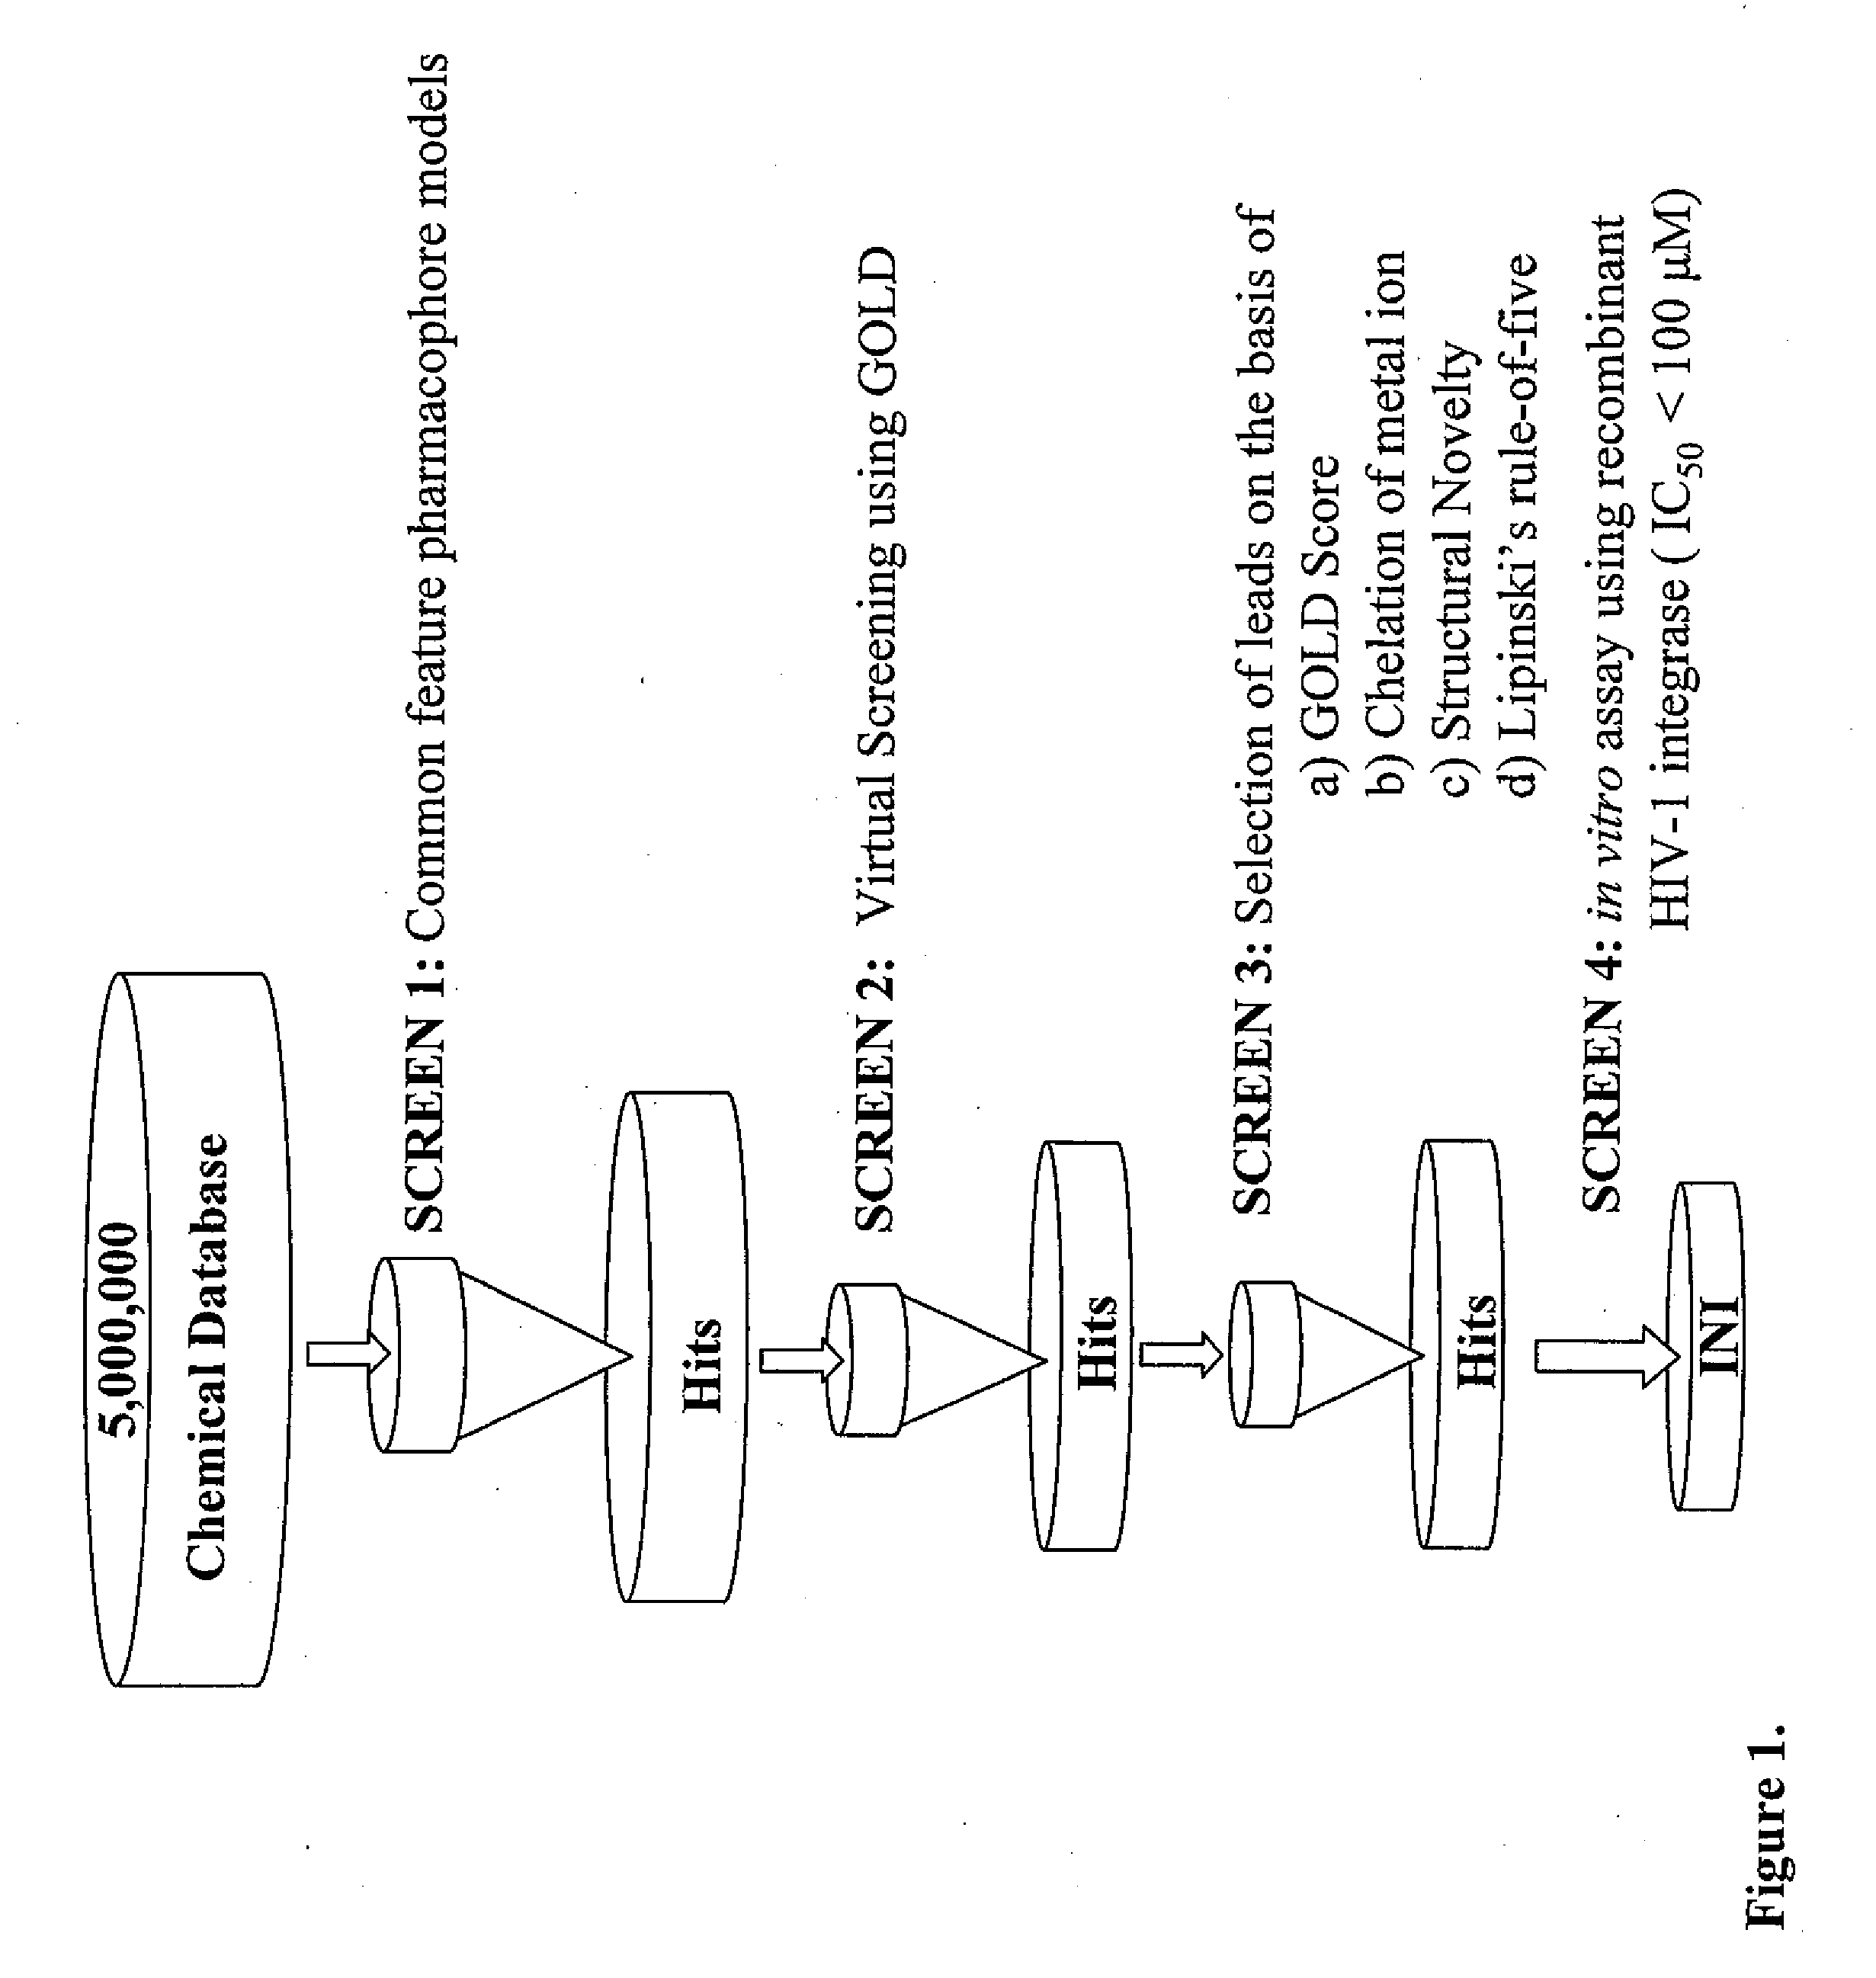 Compounds with hiv-1 integrase inhibitory activity and use thereof as Anti-hiv/aids therapeutics